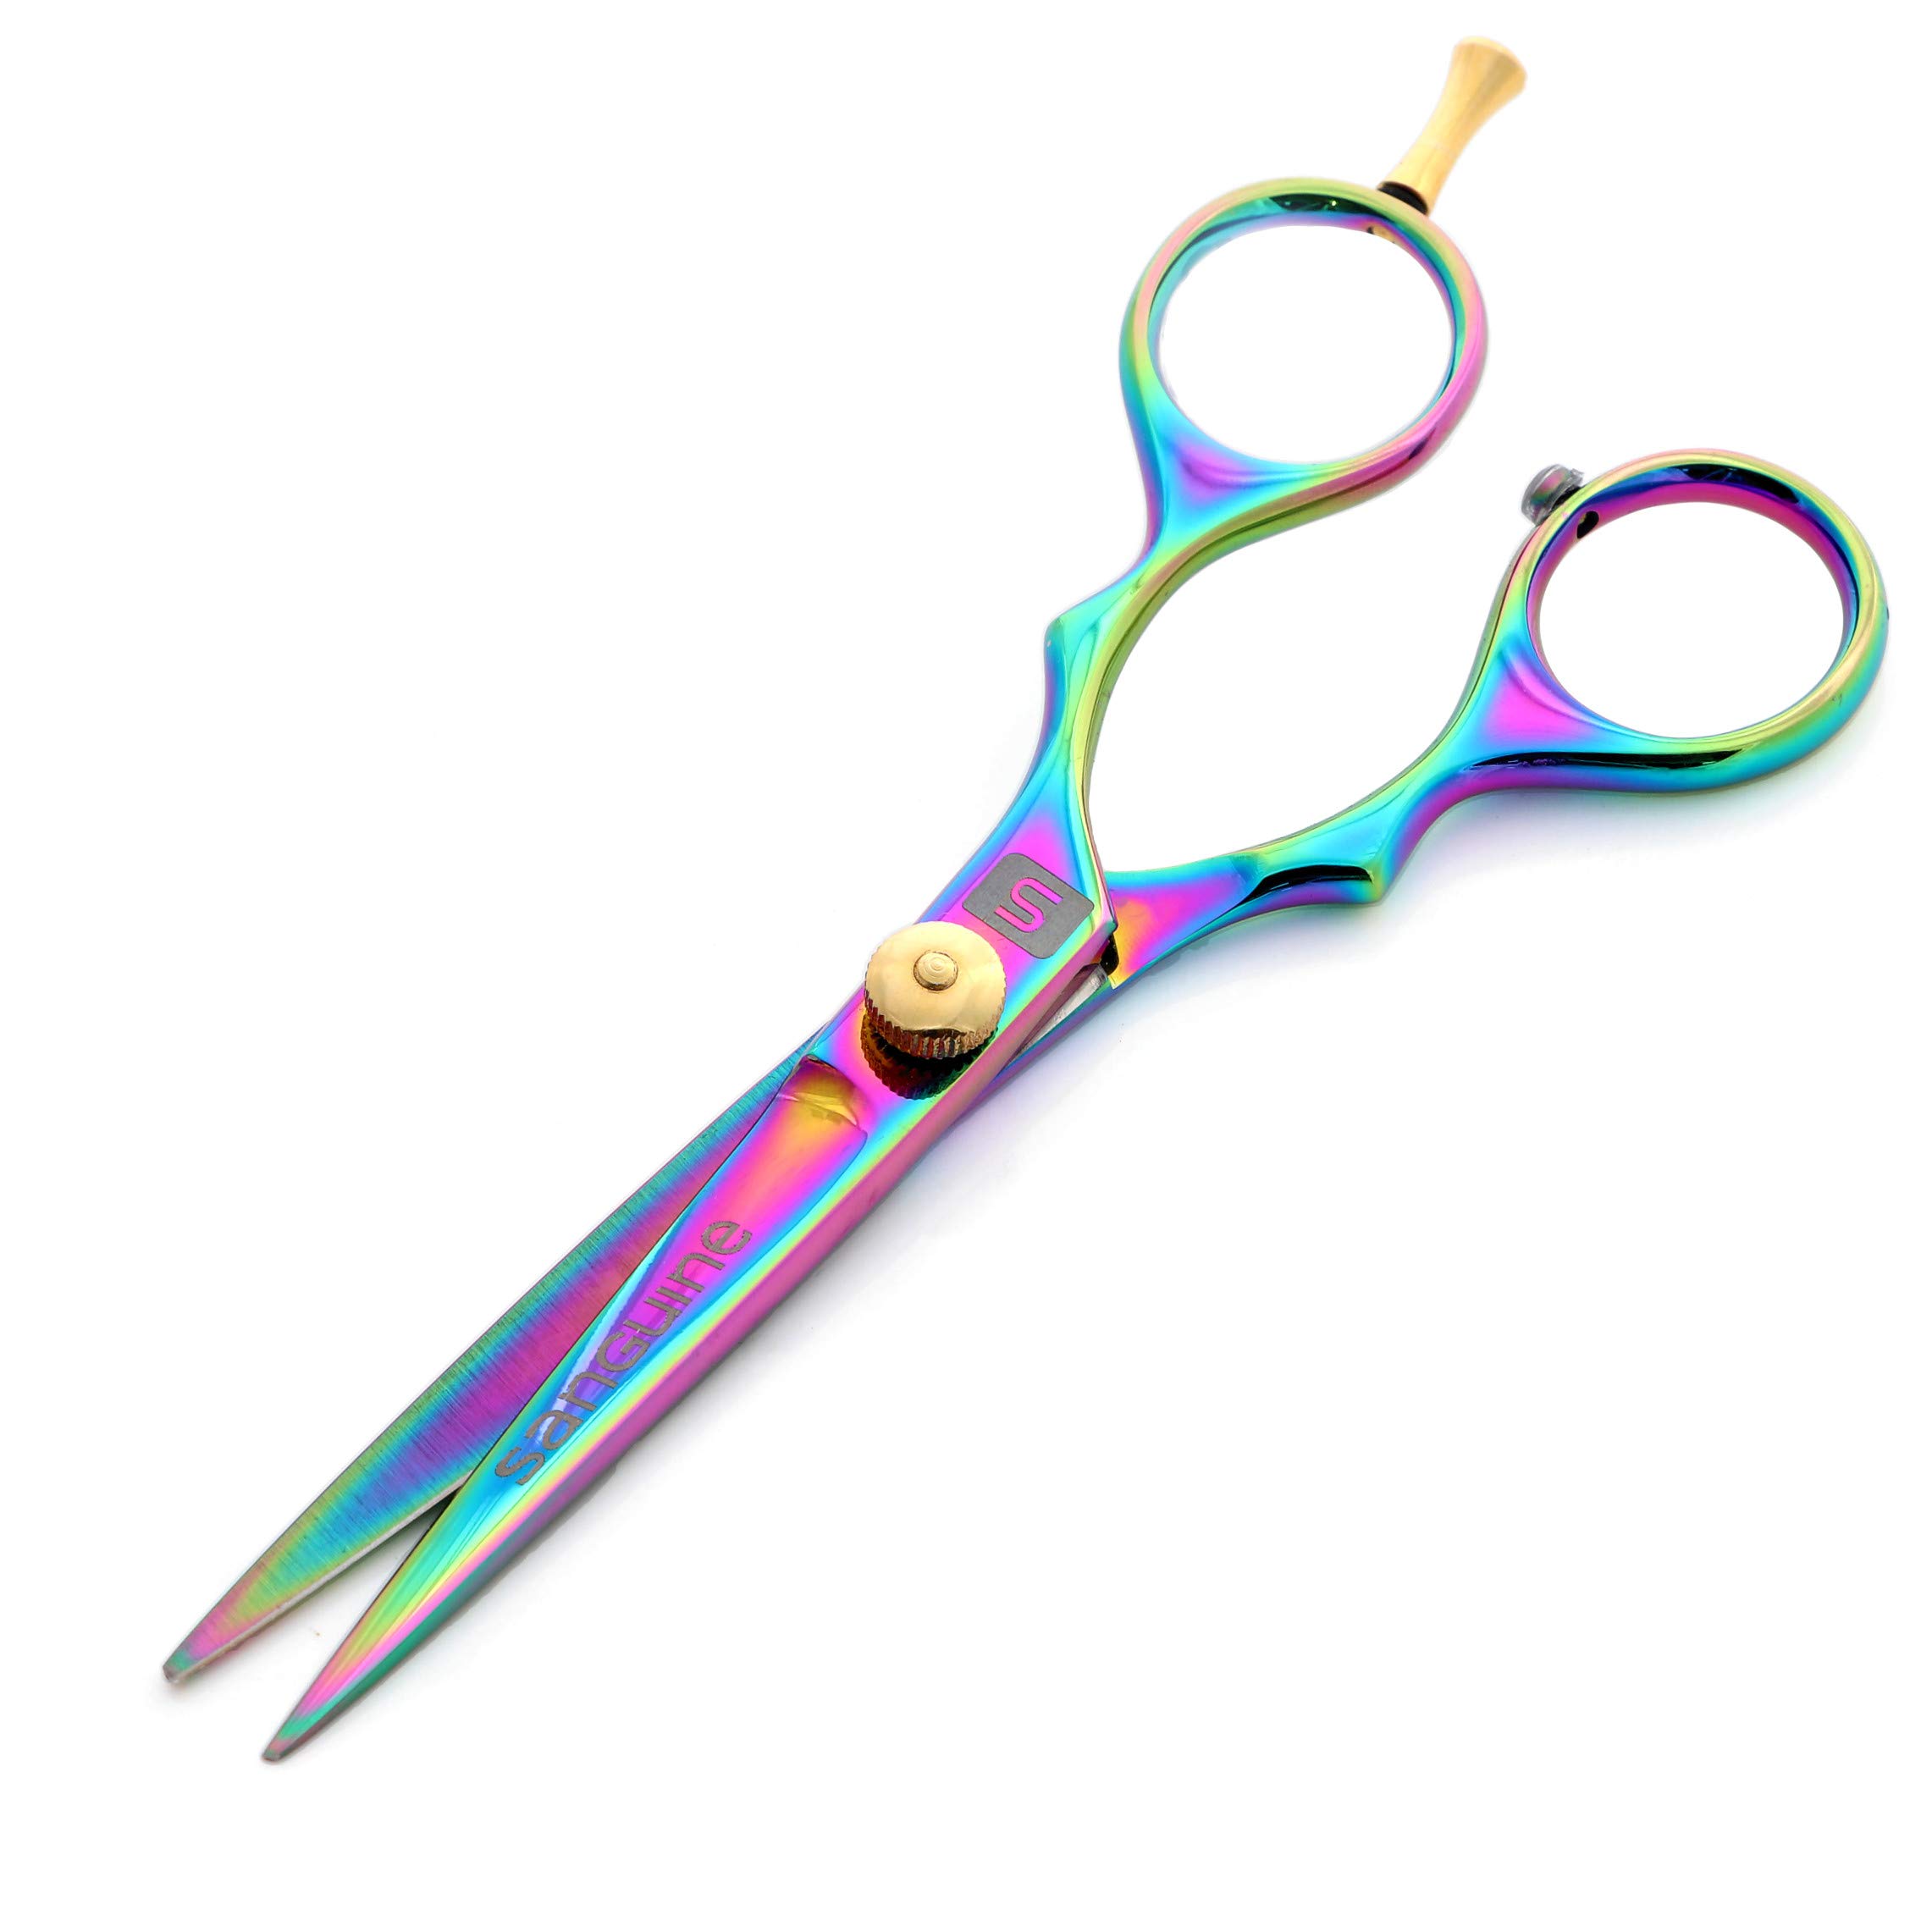 Hair Scissors for all Hair Types, 5.5 inch, Presentation Case & Tip Protector. Suitable for Hairdressers, Barbers, Professionals, Personal Use and for Beard or Moustache Trimming. Titanium